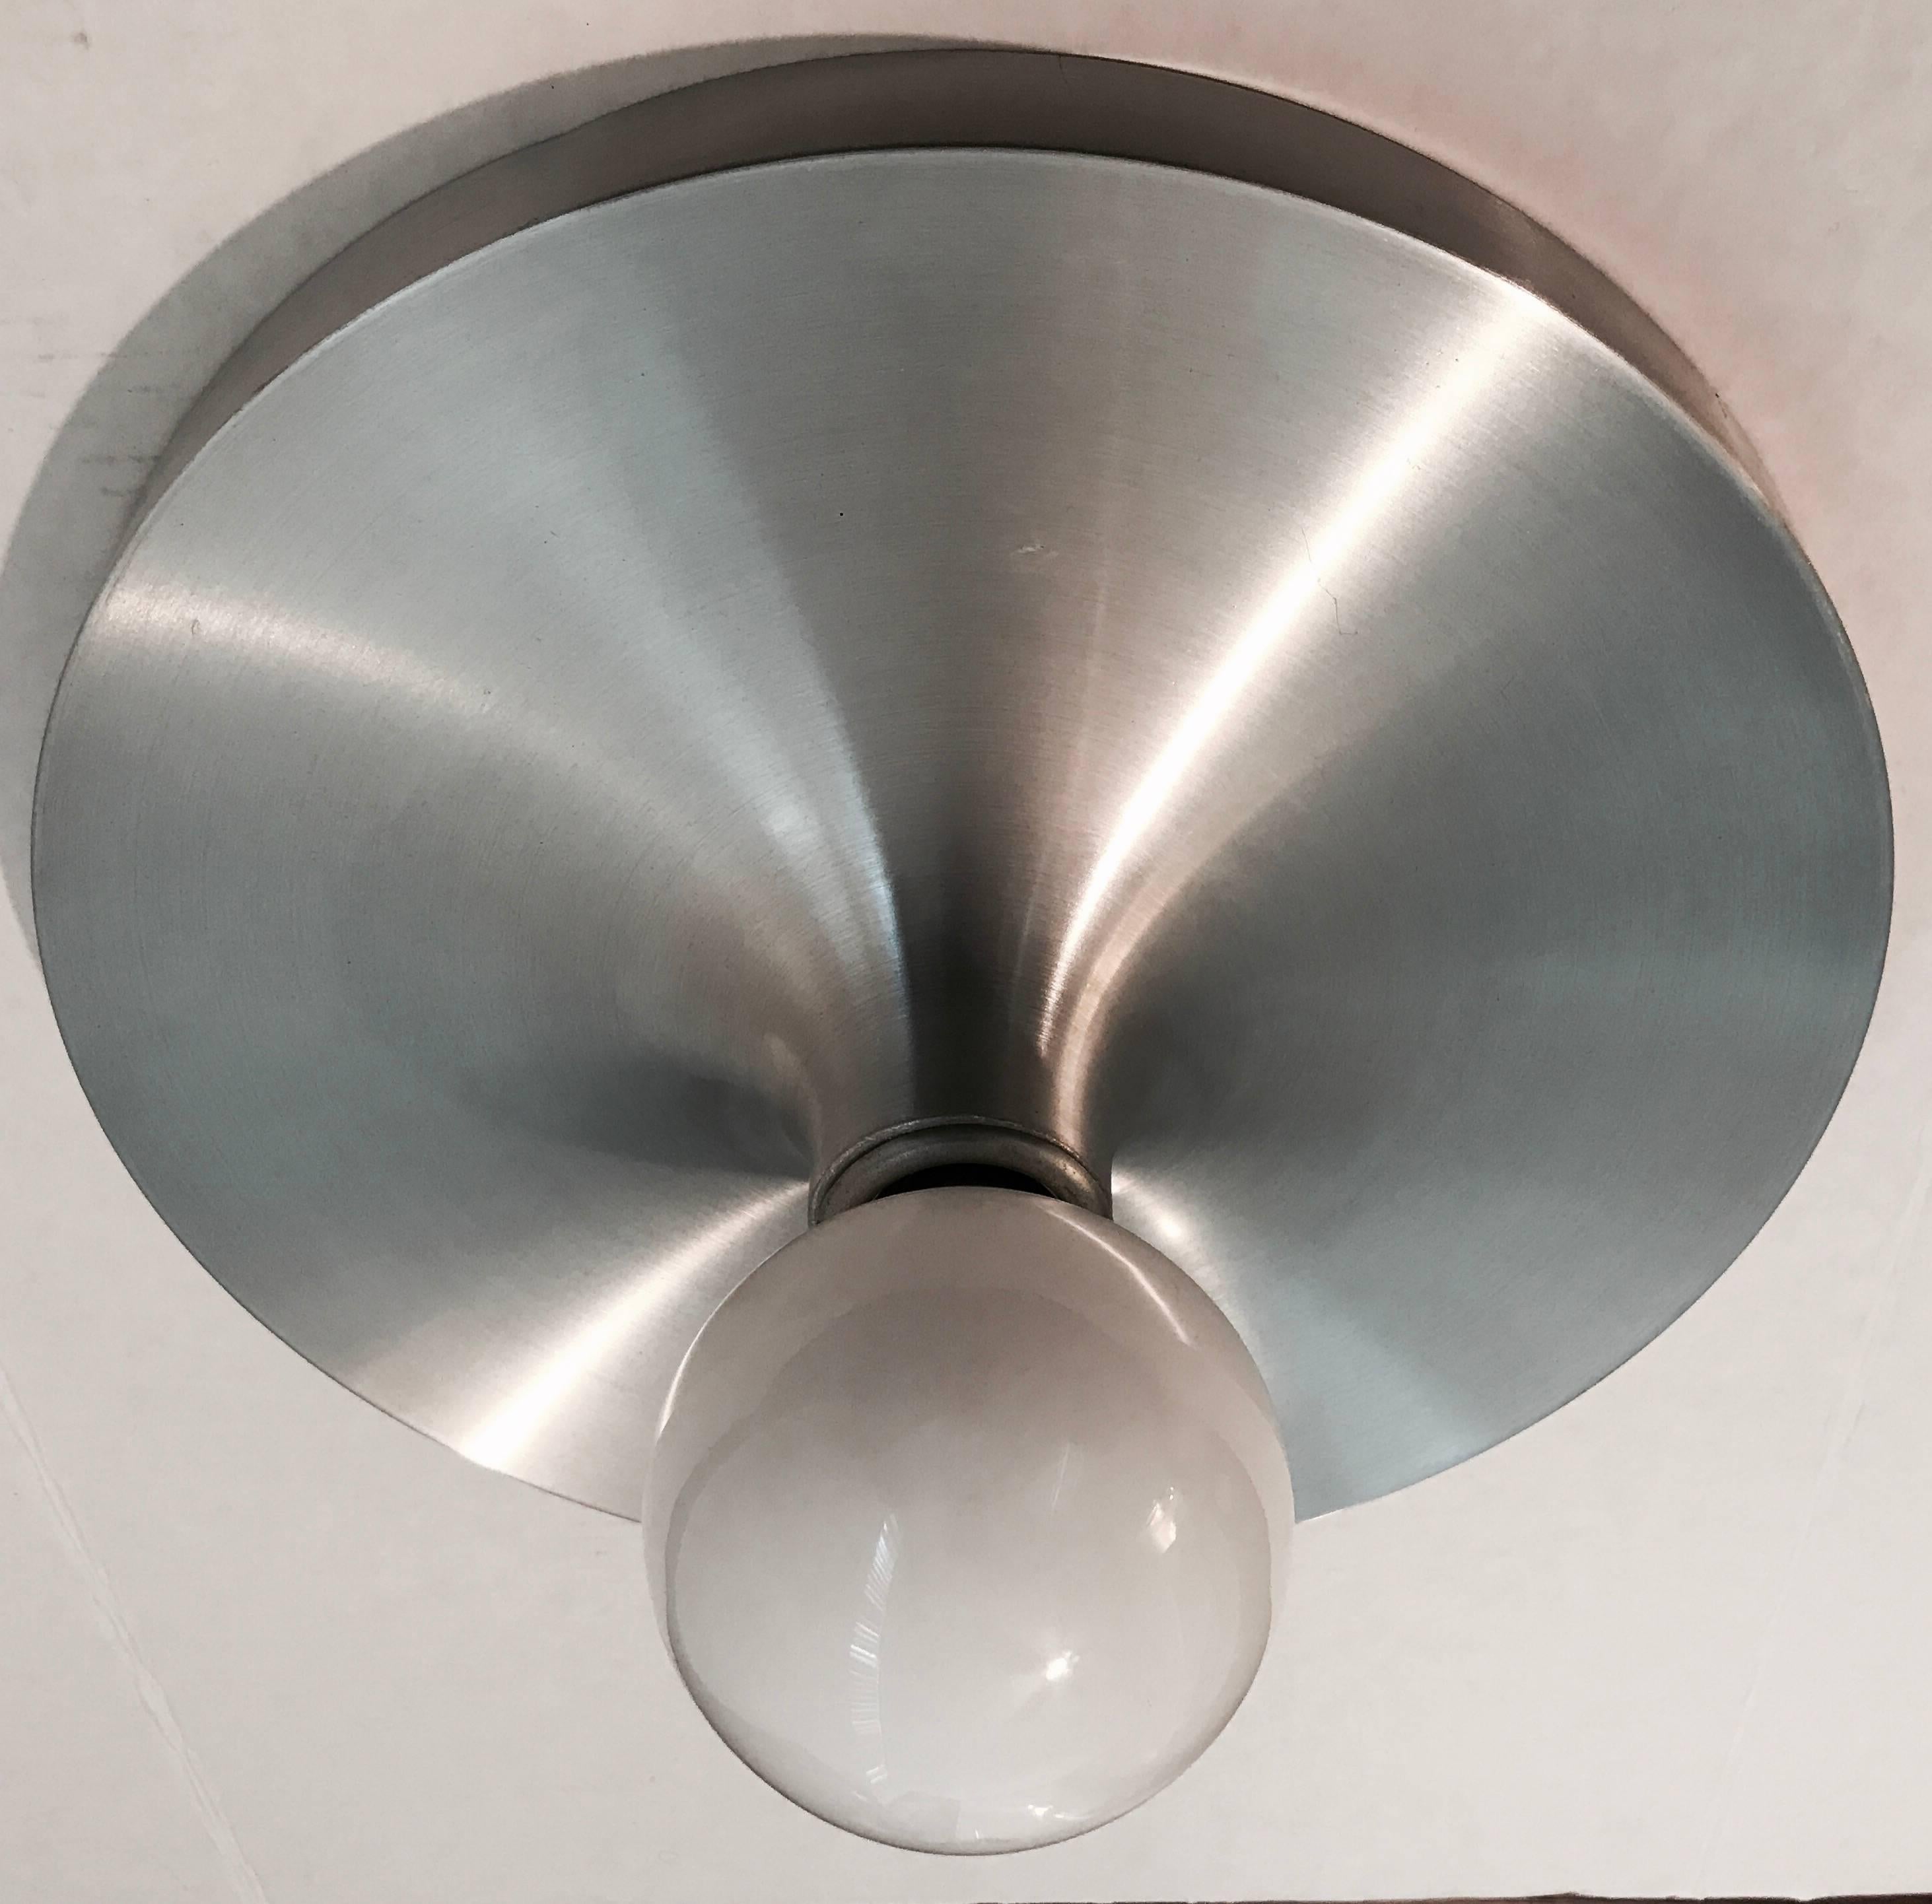 An original 1960s spun aluminum German Space ceiling or wall light designed by Honsel. Newly Rewired. Used by Charlotte Perriand for Les Arcs Ski resort.